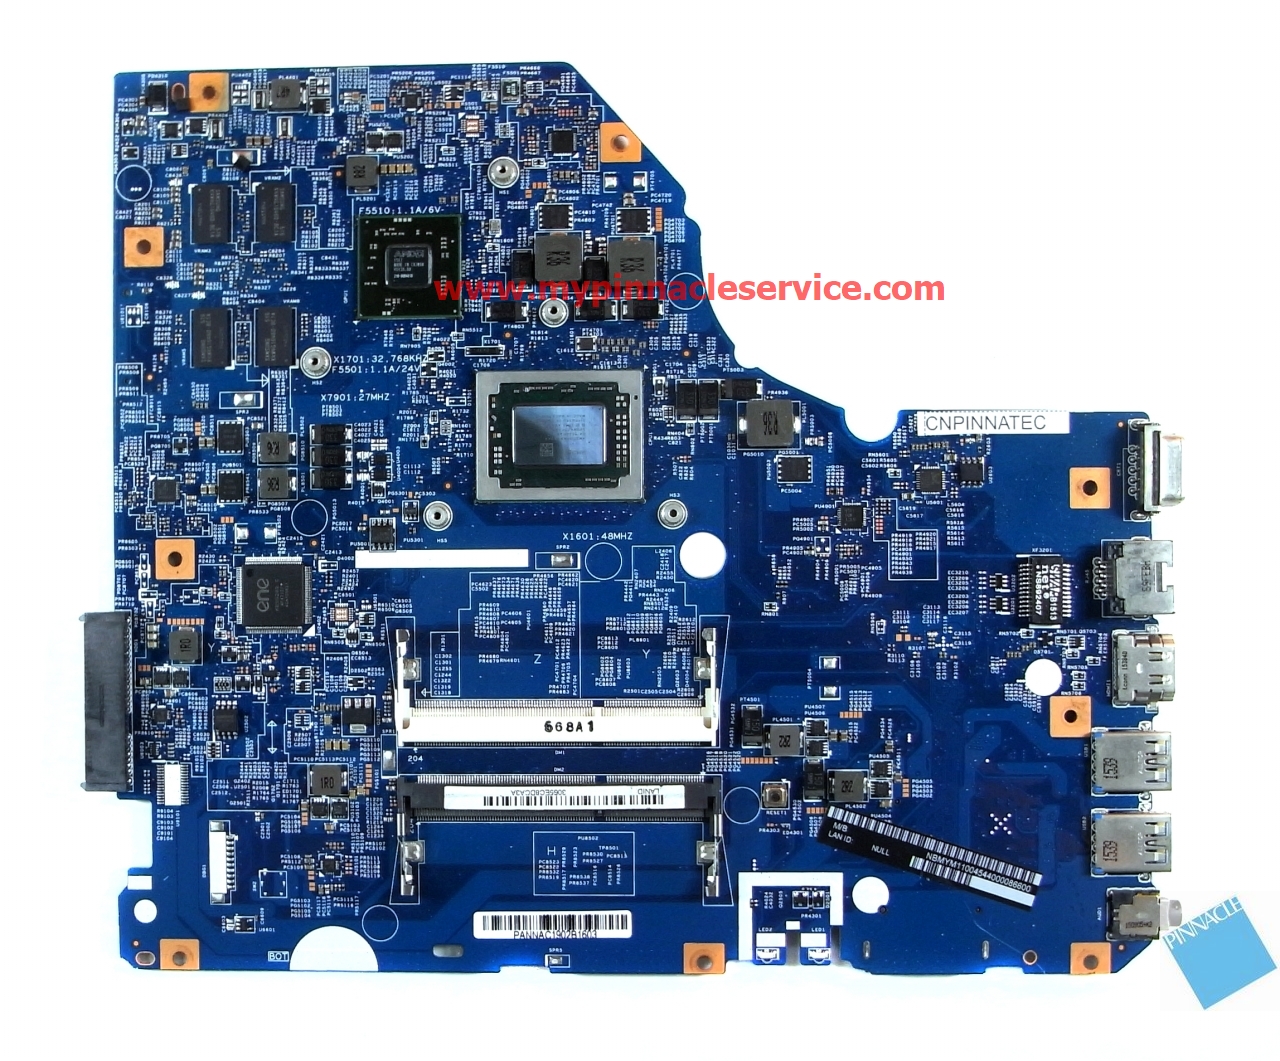 nbmym11004-a10-8700p-motherboard-for-acer-aspire-e5-752g-448.04y03.0031-rimg0050.jpg